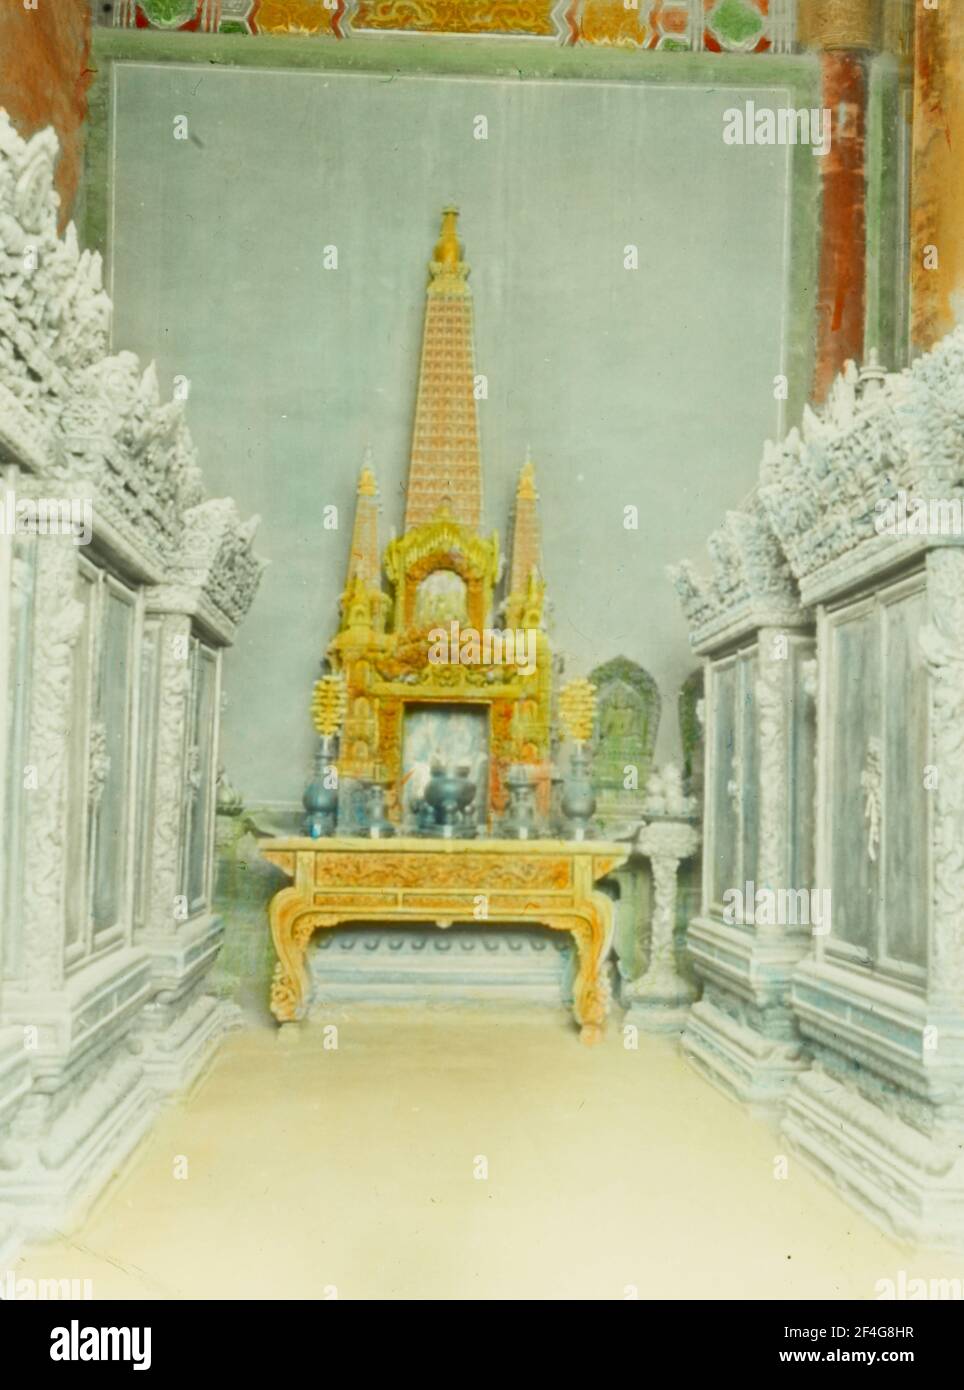 Frontal view of a low, gilded Buddhist altar, with pagoda-like spires and receptacles for offerings on its surface, placed against a wall and hemmed by ornately carved cabinets, Beijing, China, 1918. From the Sidney D. Gamble photographs collection. () Stock Photo